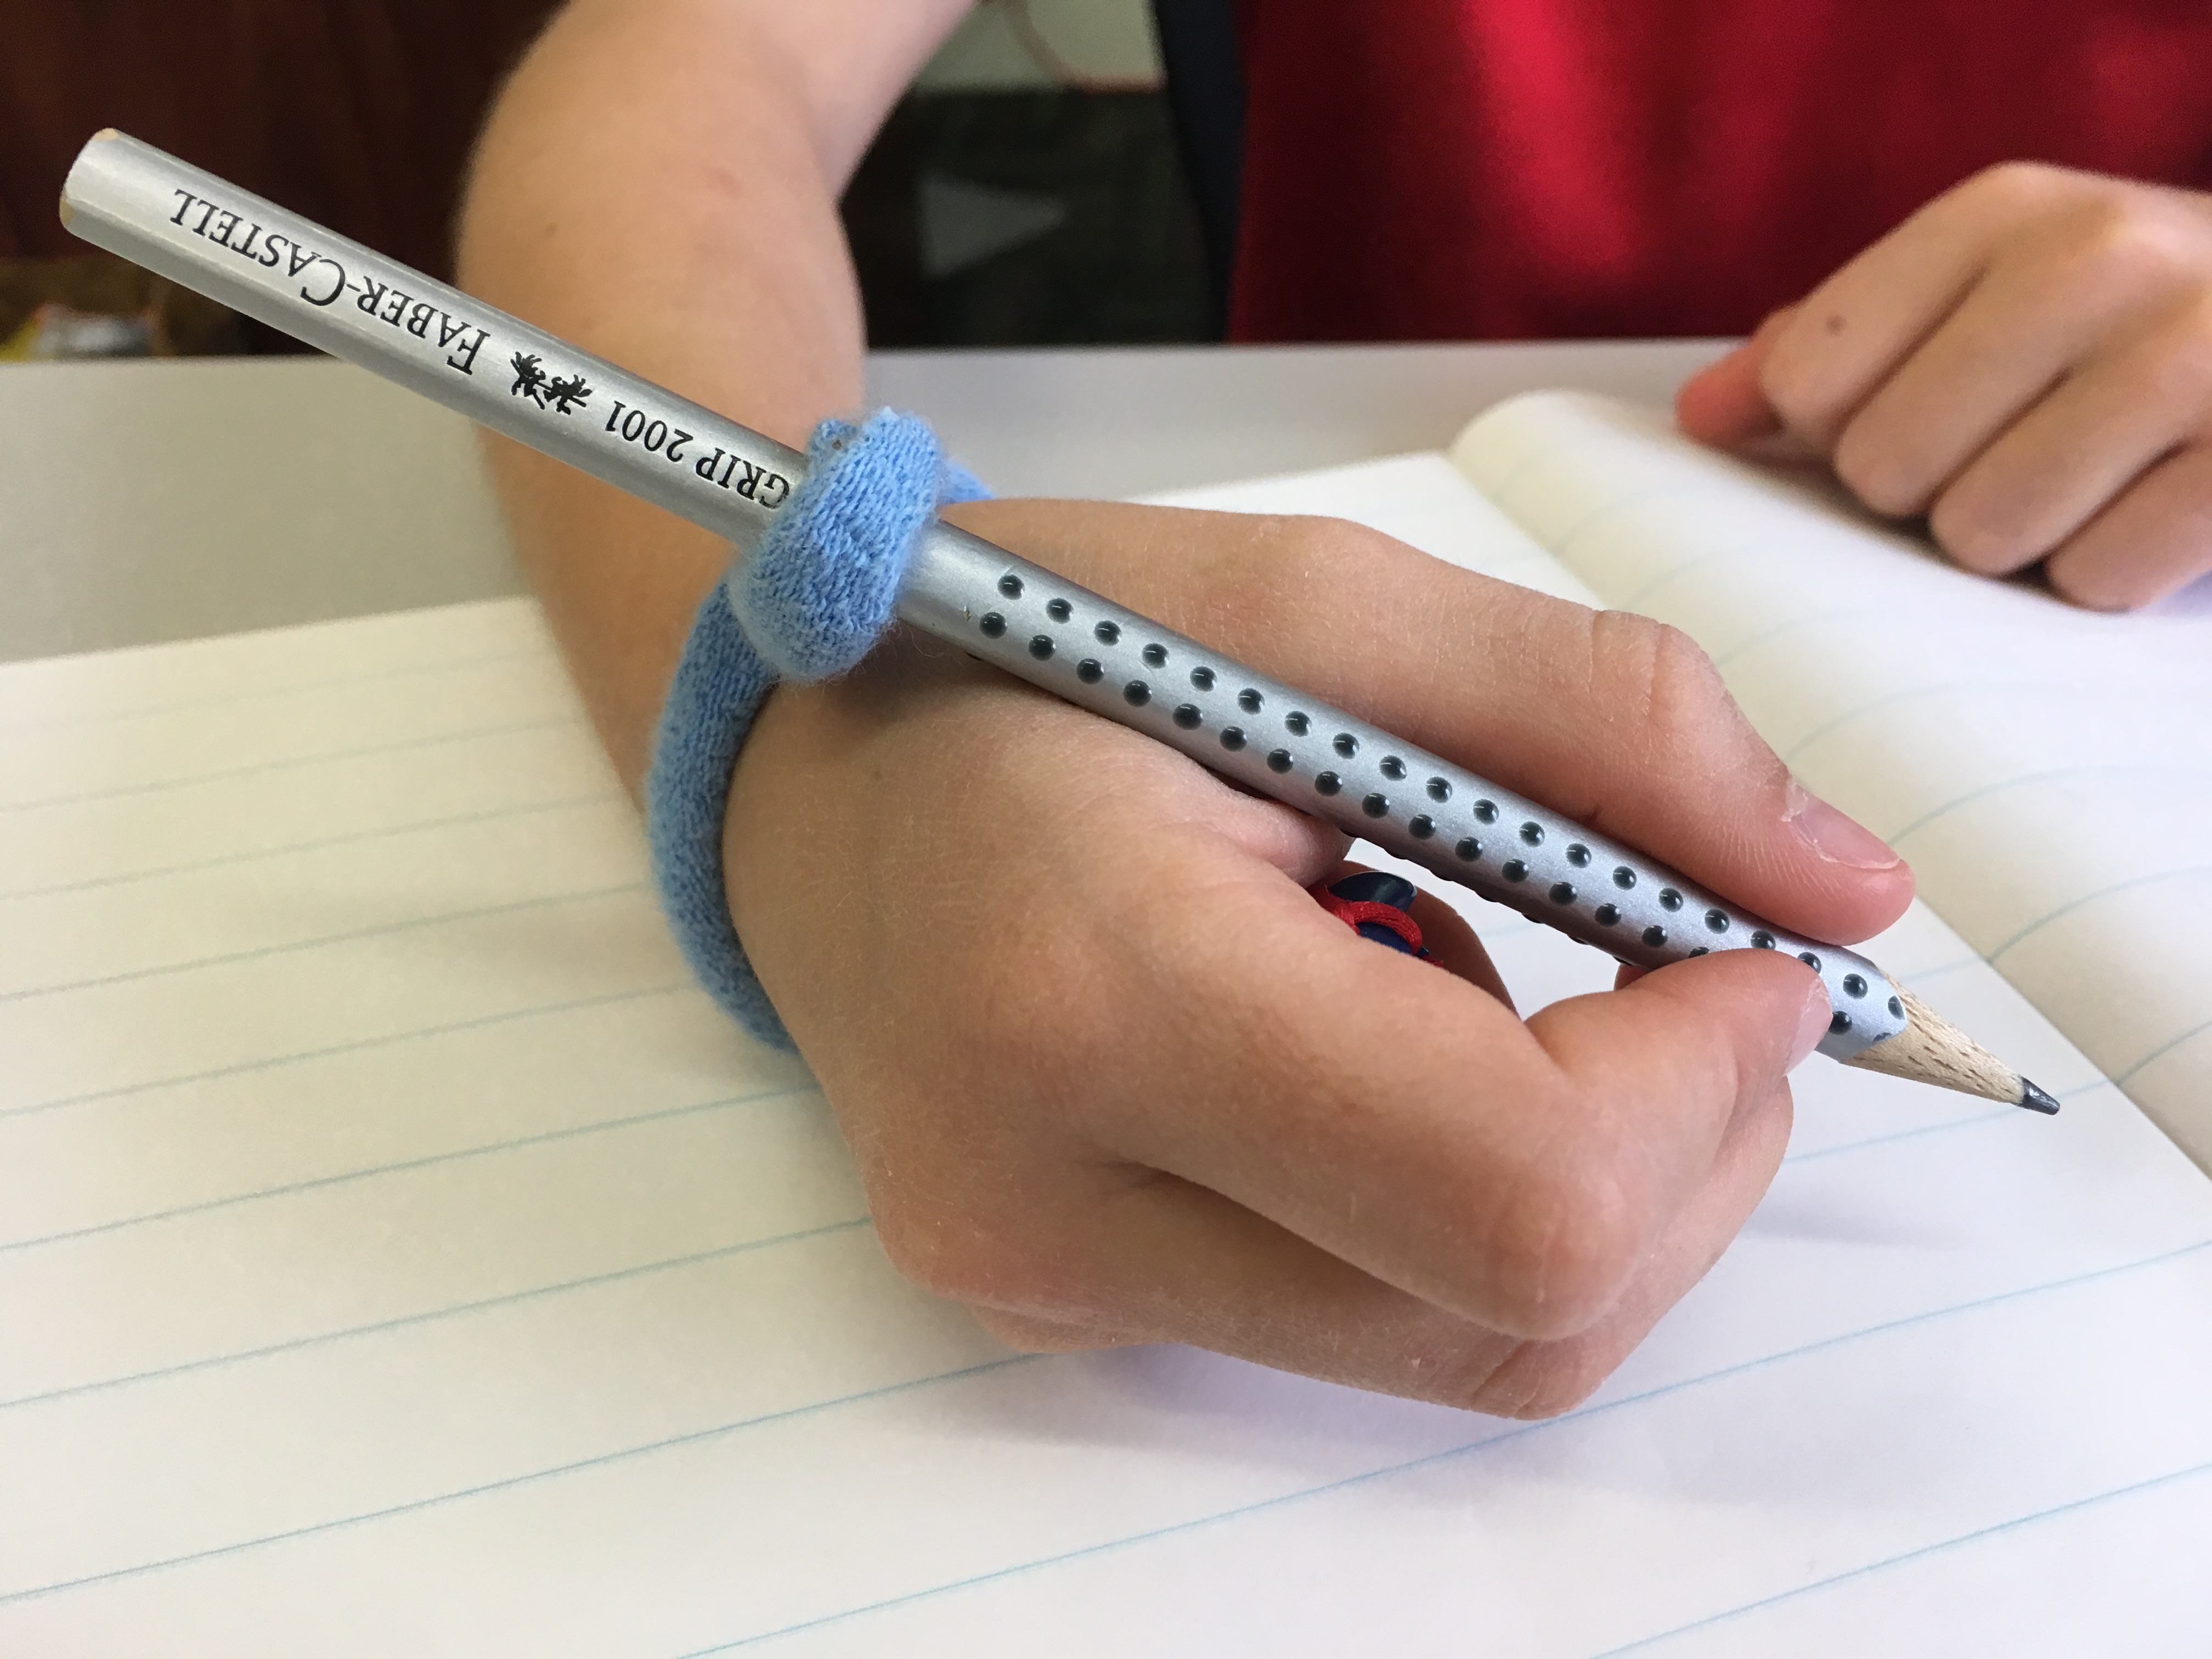 Pencil grip with string attached